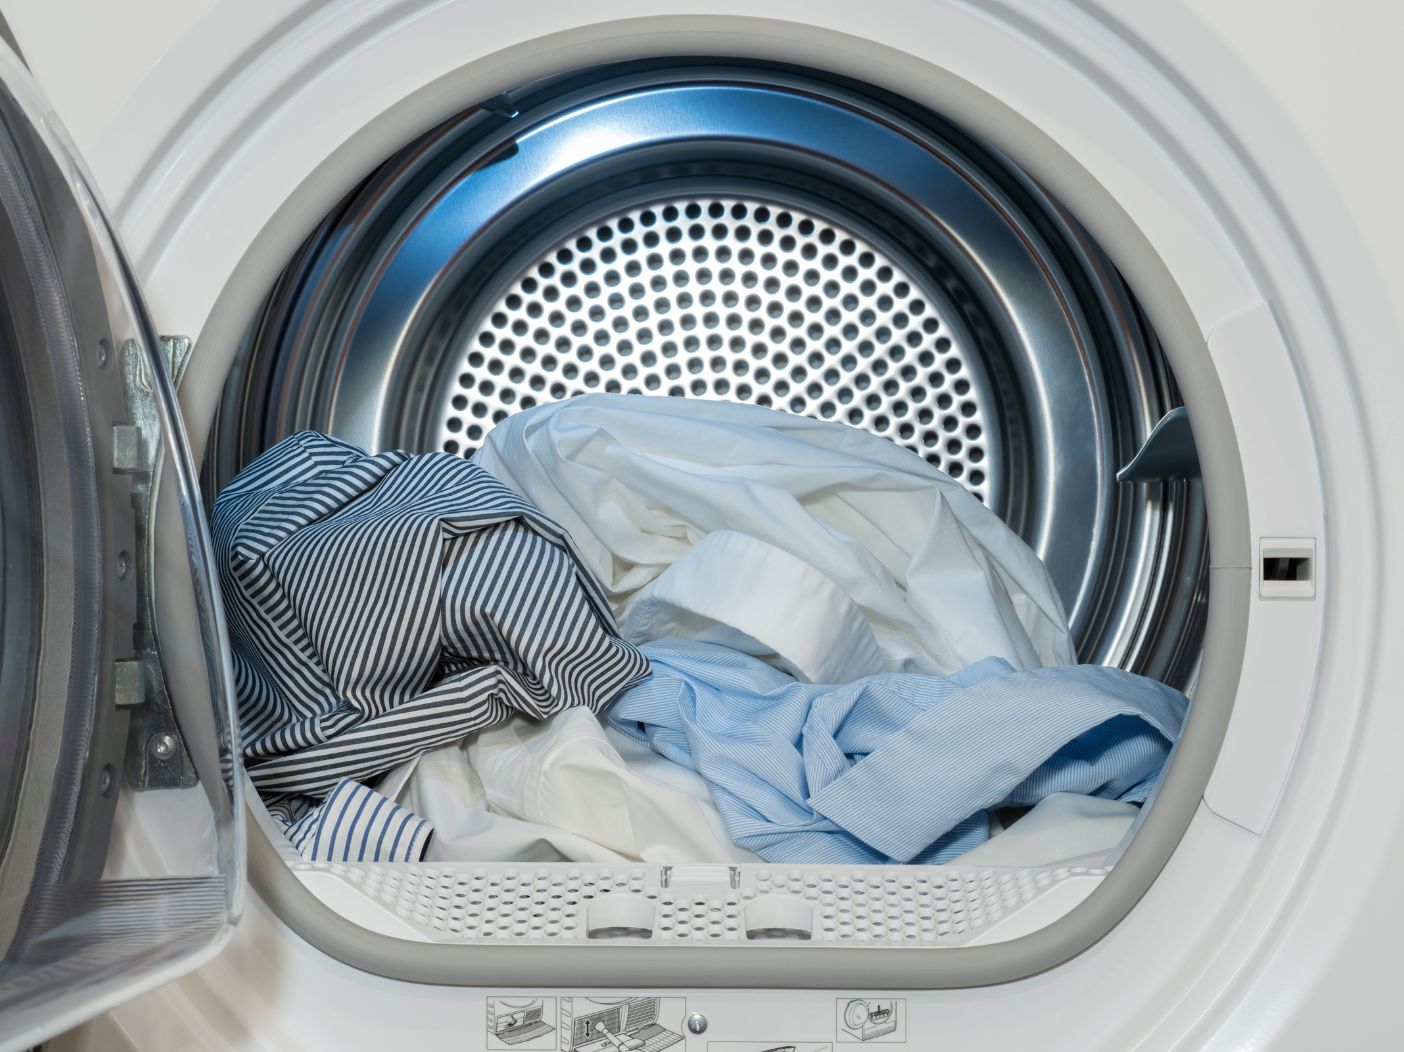 Hack Claims Ice In Dryer May Help Smooth Wrinkles From Clothes